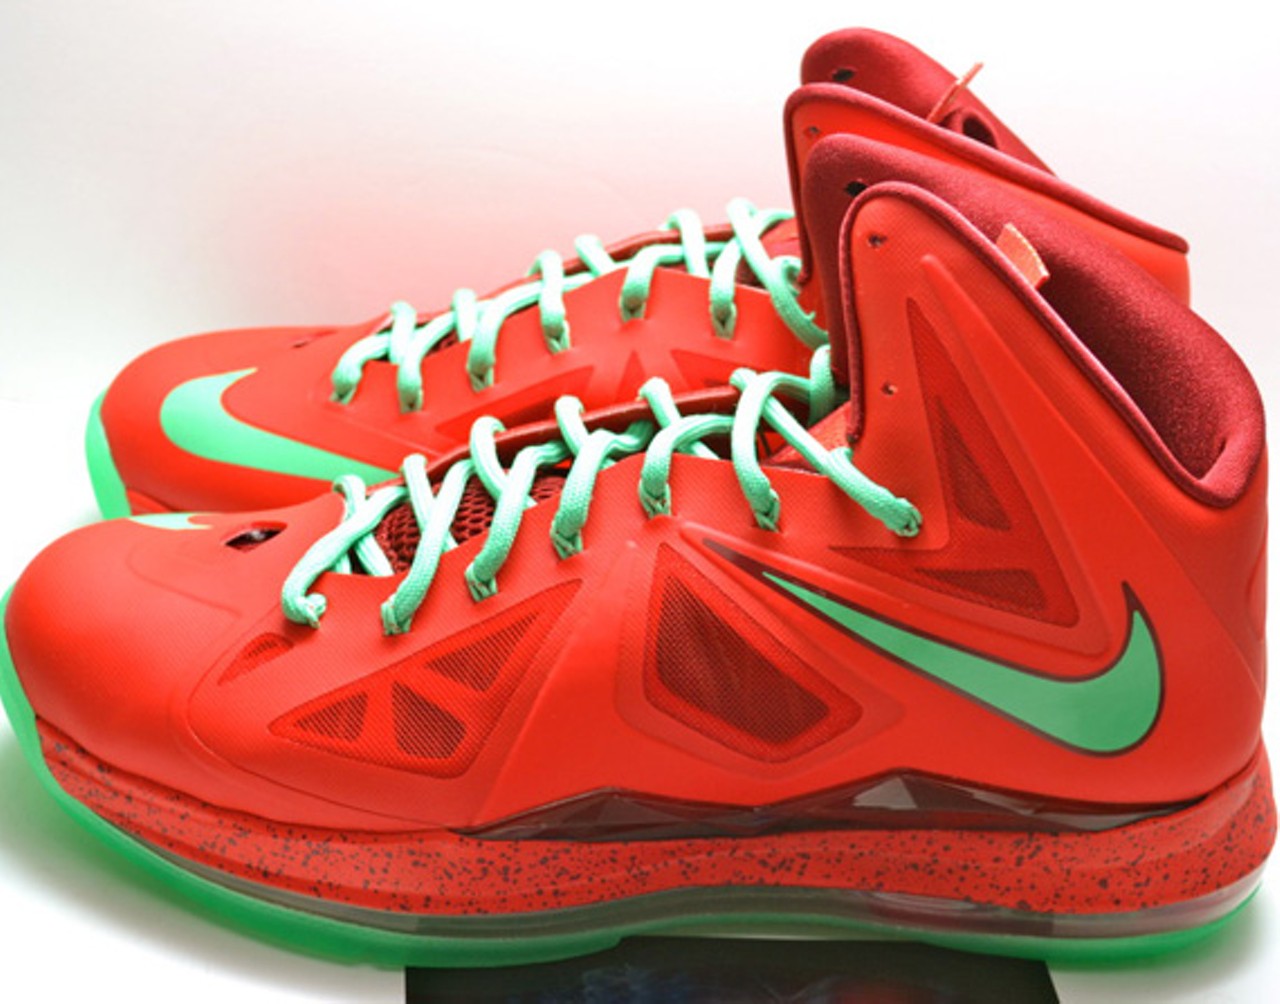  Good | LeBron X: &#147;Christmas&#148;
The VIIIs and IXs were widely considered some of the best LeBron&#146;s, but the 10&#146;s were a bit of a letdown. However, this under the radar 10 is one of our favorites. The &#147;Christmas&#148; colorway hits that perfect spot of not being too over the top but will still stand out enough for someone to notice. This is definitely one of our favorites on this list, perfect for the holiday season.
Photo via Kicks On Fire/Facebook